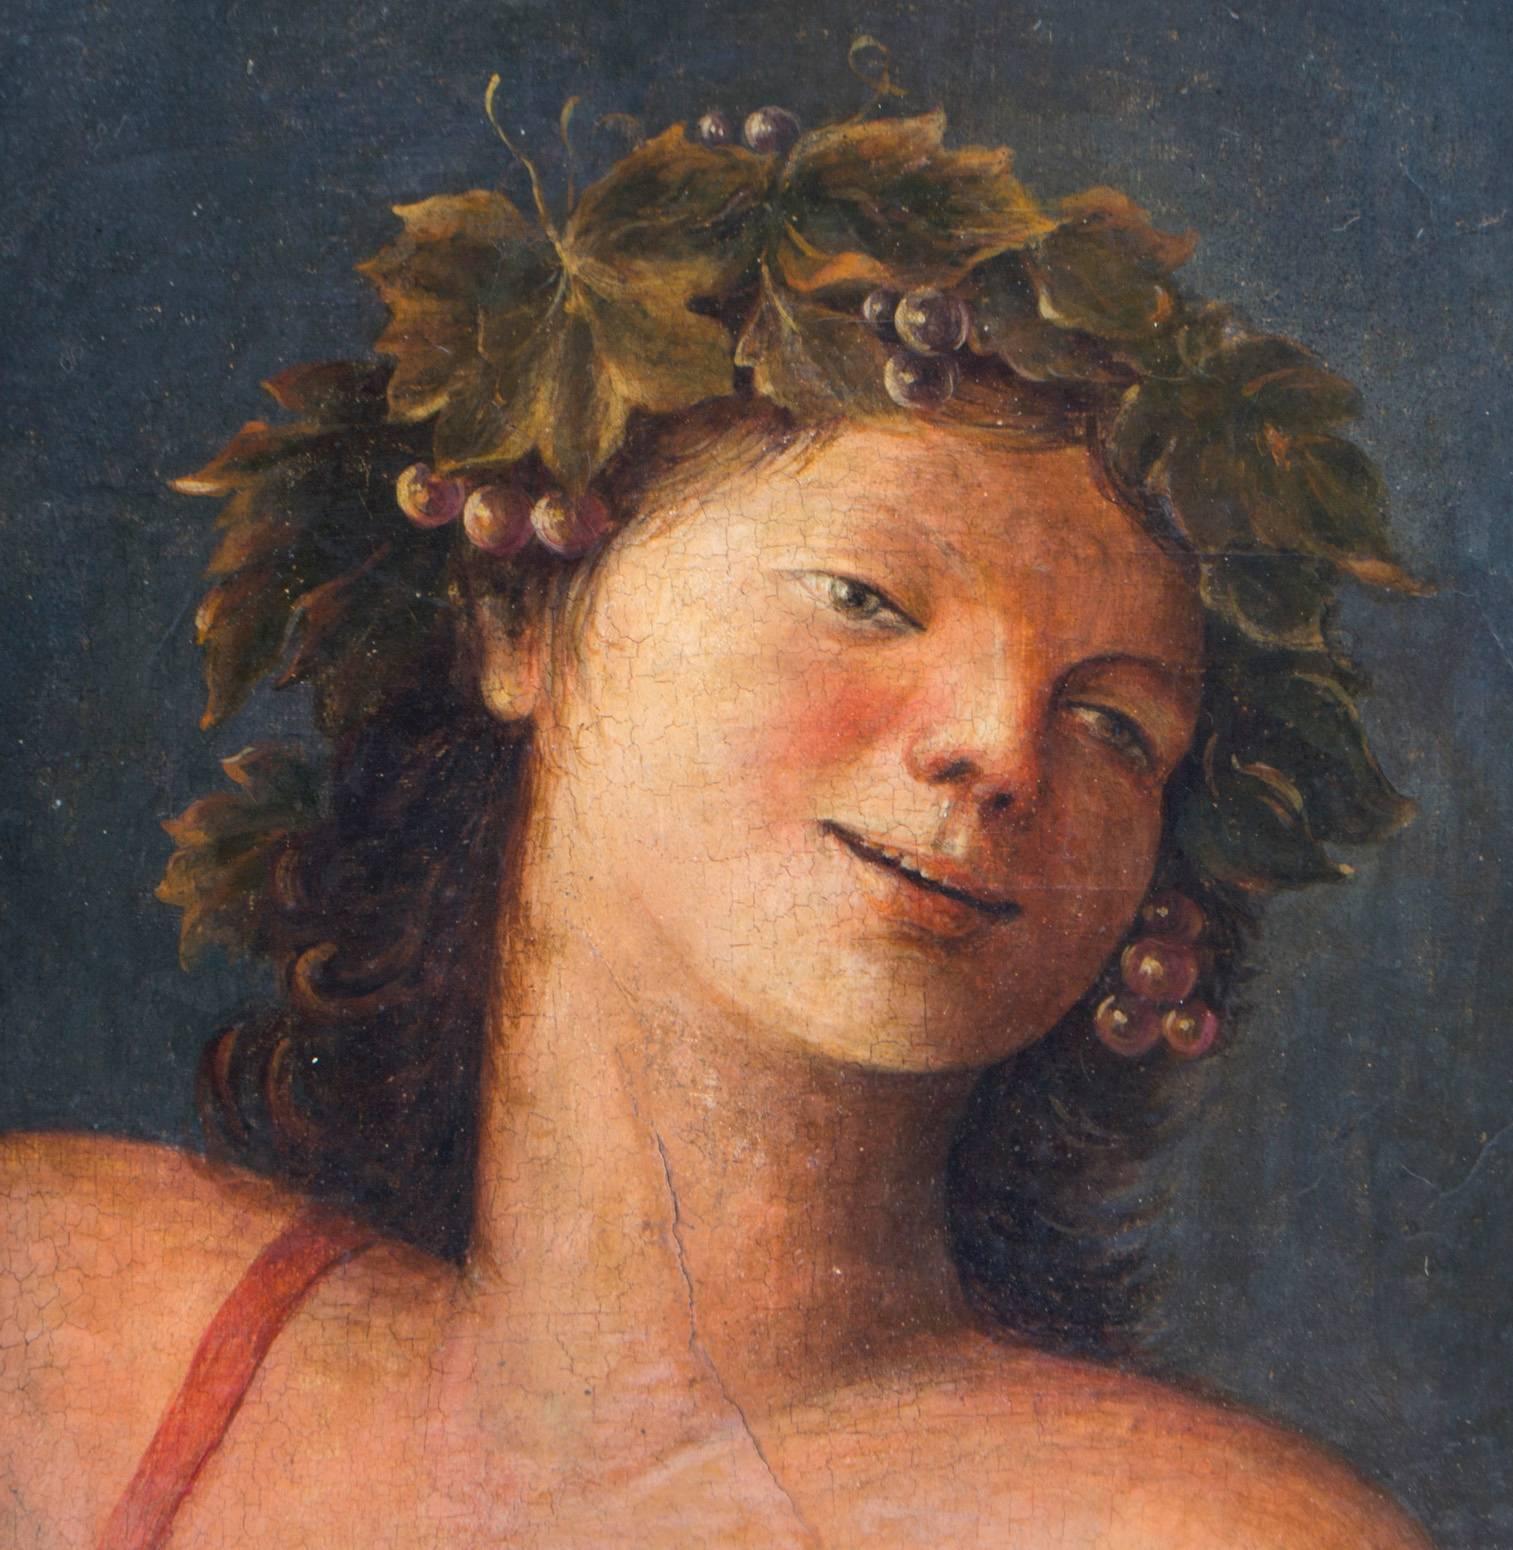 'Young Man with Grape Laurel Wreath', circa 1880.

This portrait of a young man with a grape crown was painted by a late century artists the follower of the Roman School of Michelangelo Cerquozzi (1602-1660). 

The painting depicts the antique